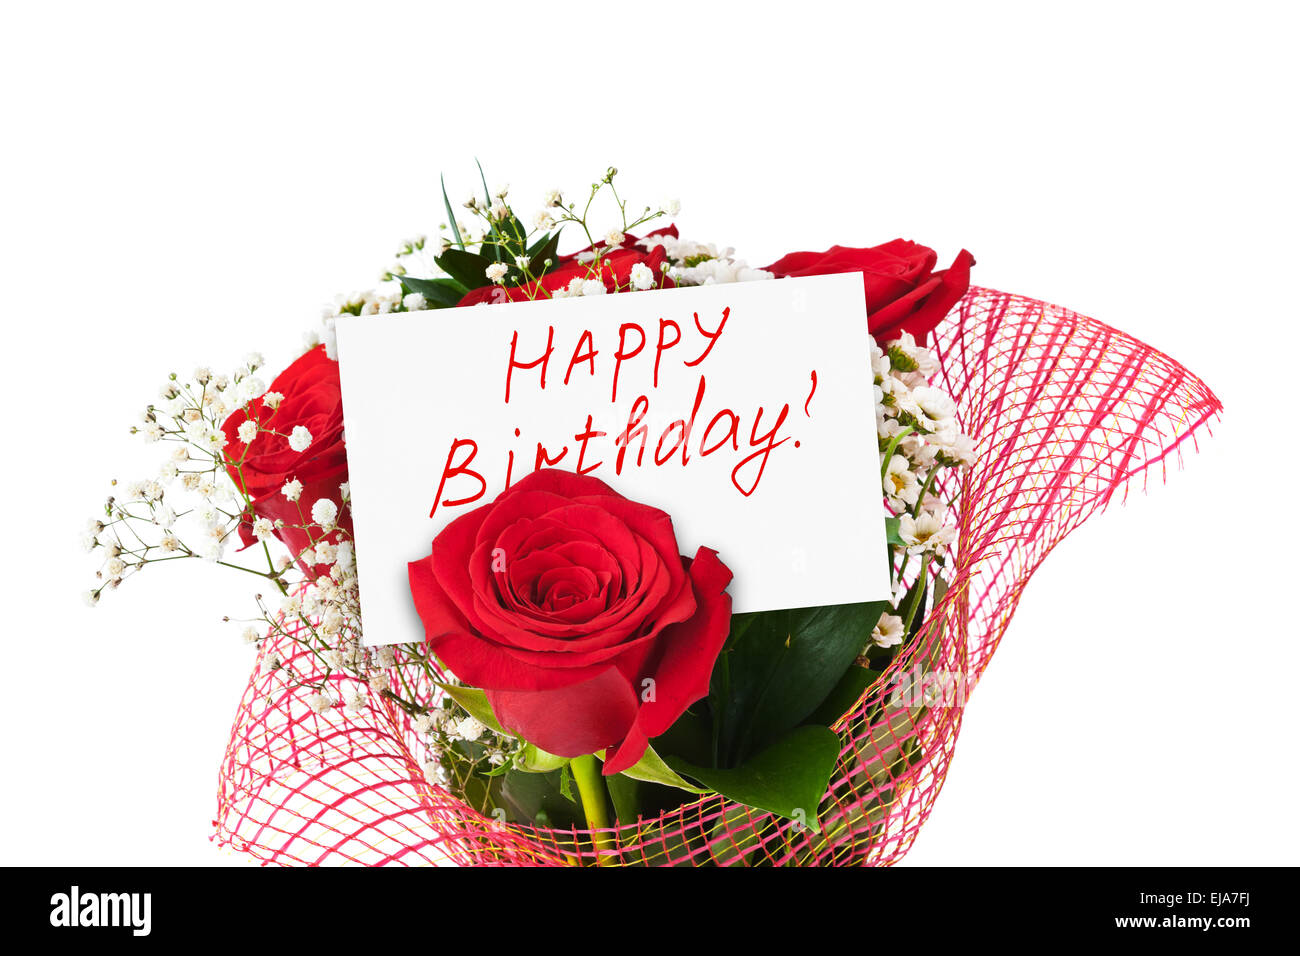 Roses Bouquet And Card Happy Birthday Stock Photo 80130726 Alamy